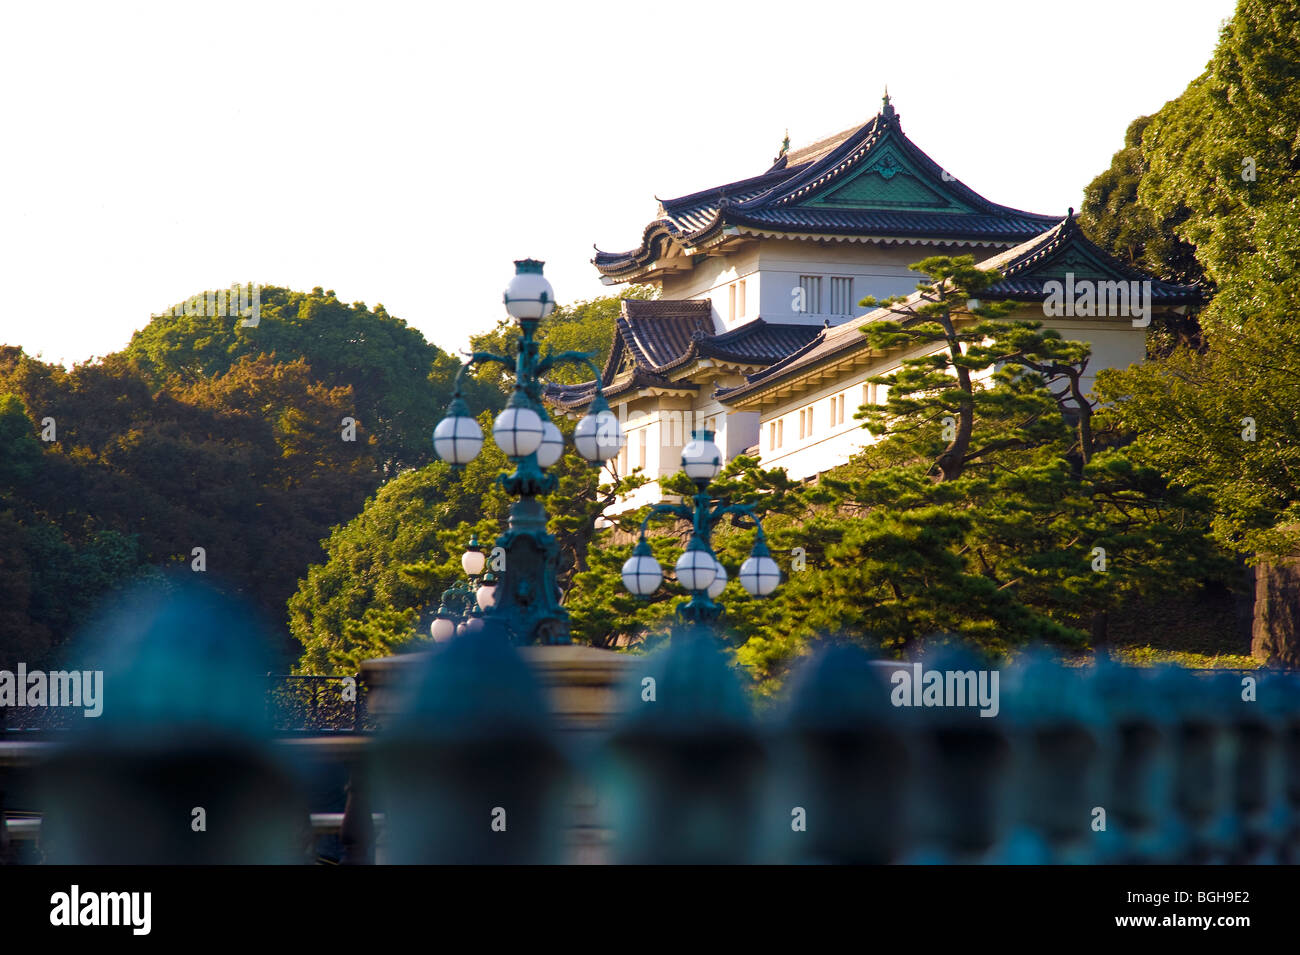 Imperial Palace Tokyo Japan Stock Photo Alamy